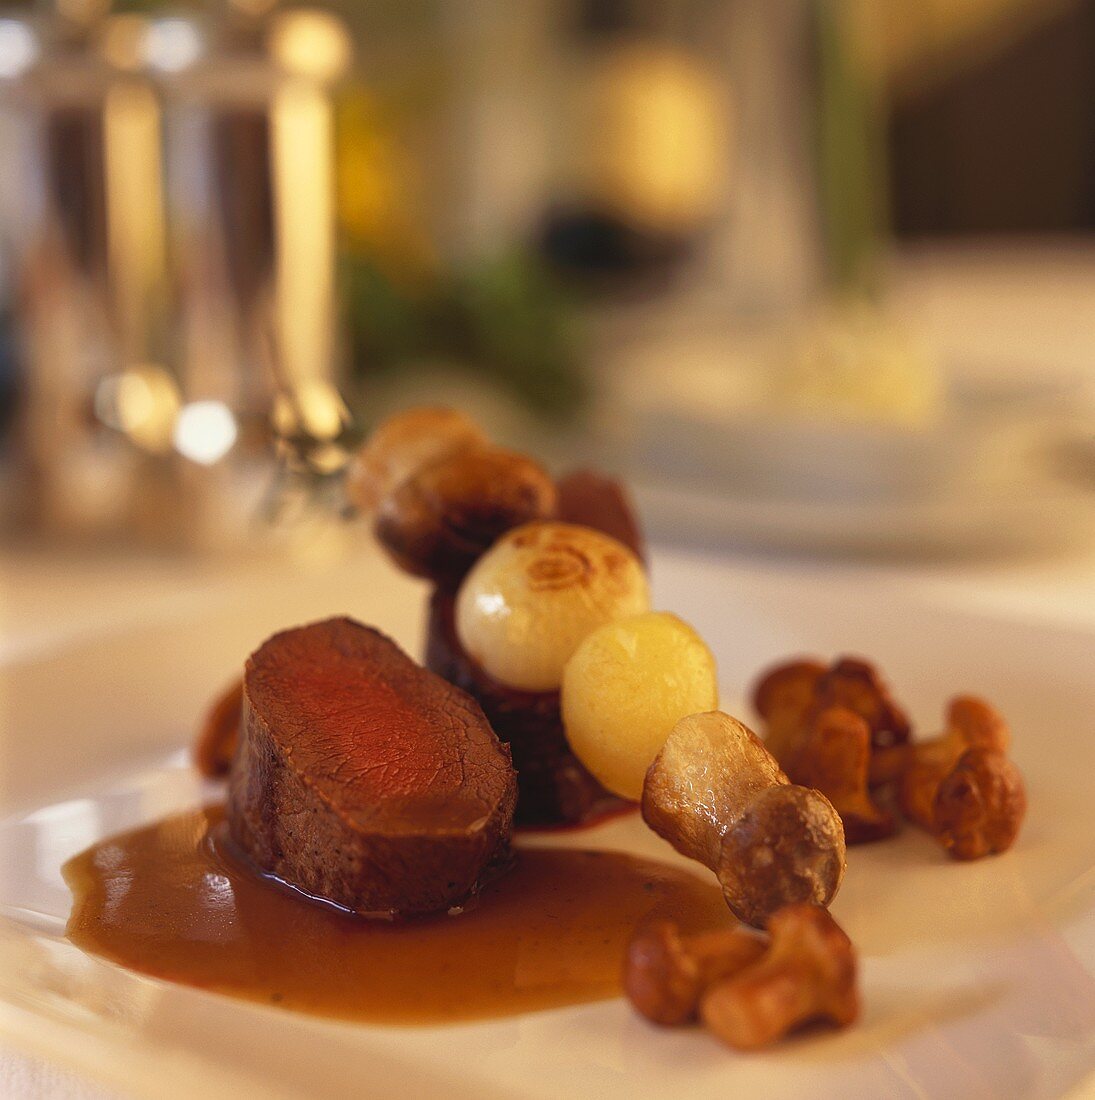 Venison medallions with chanterelles and skewered ceps